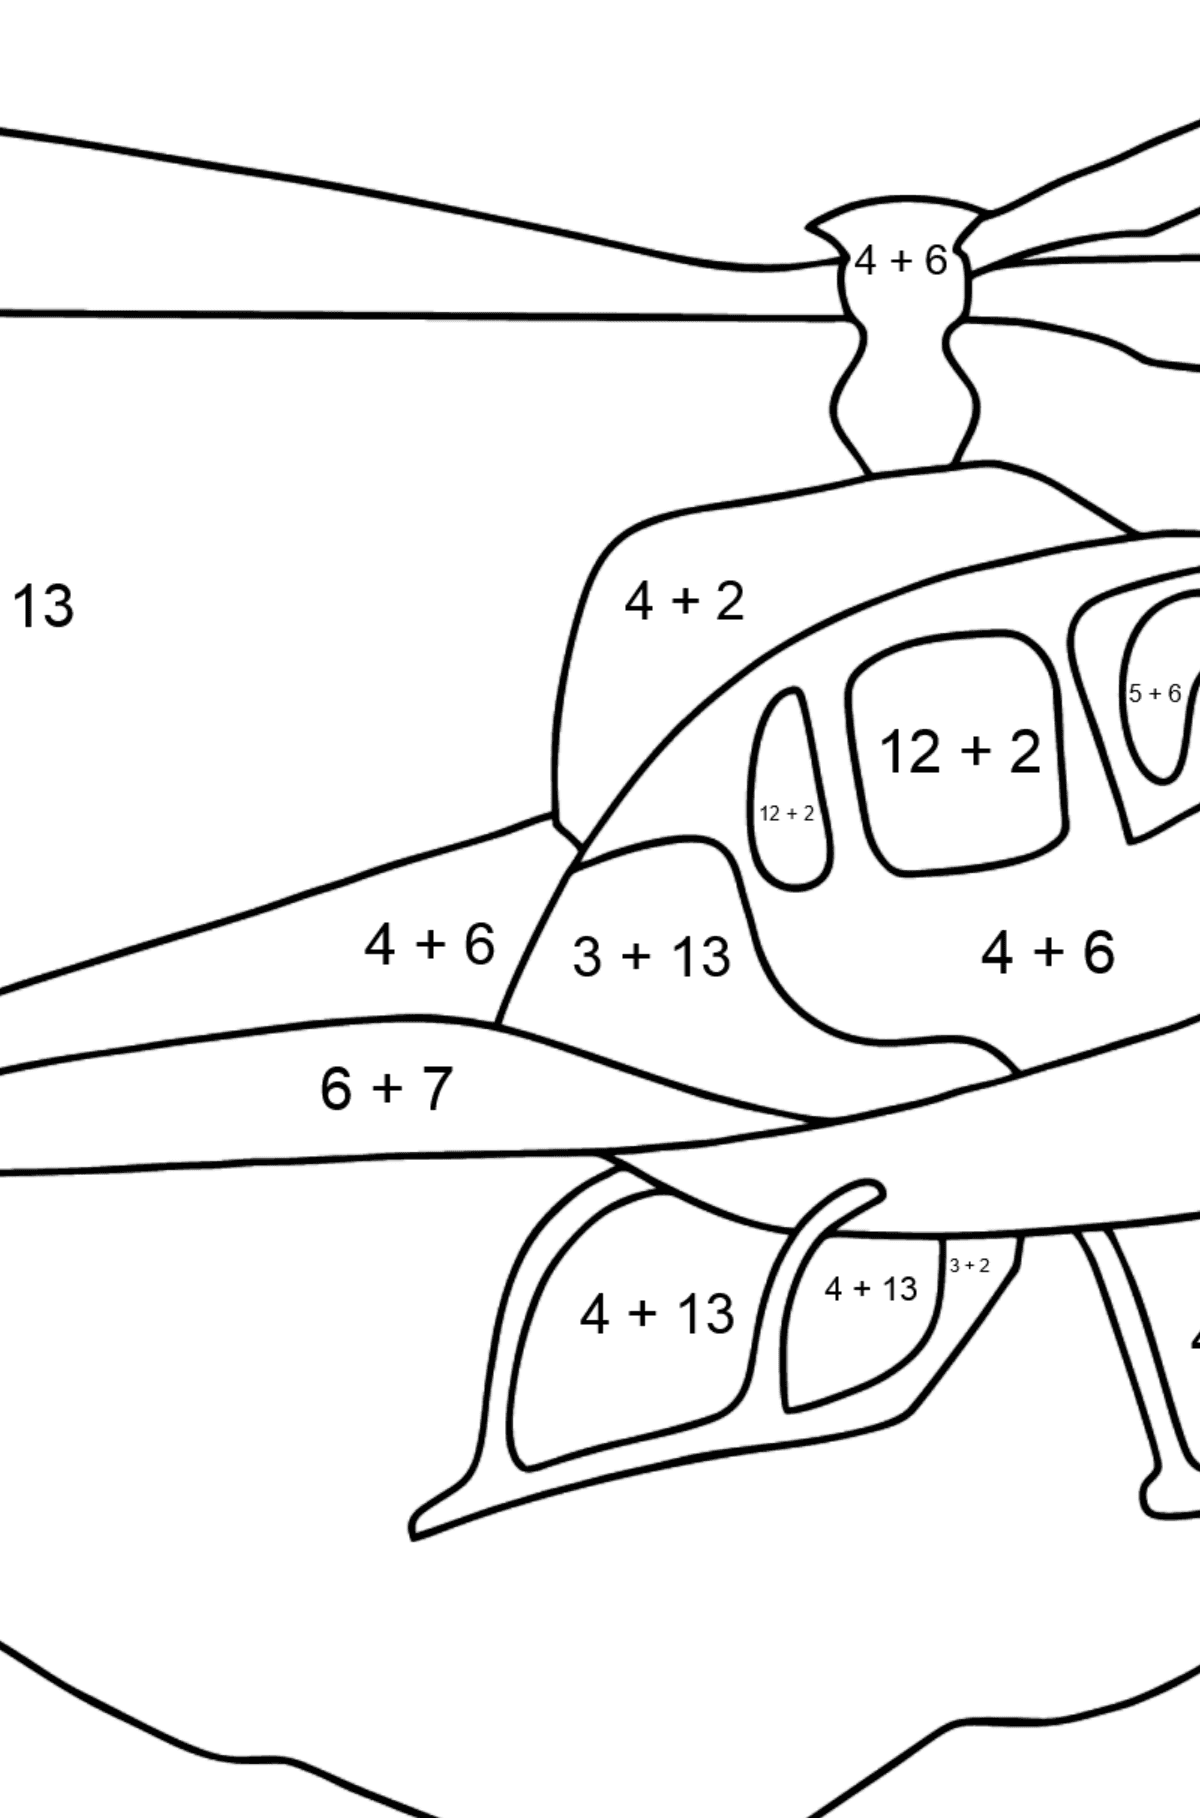 Coloring Page - A City Helicopter - Math Coloring - Addition for Kids